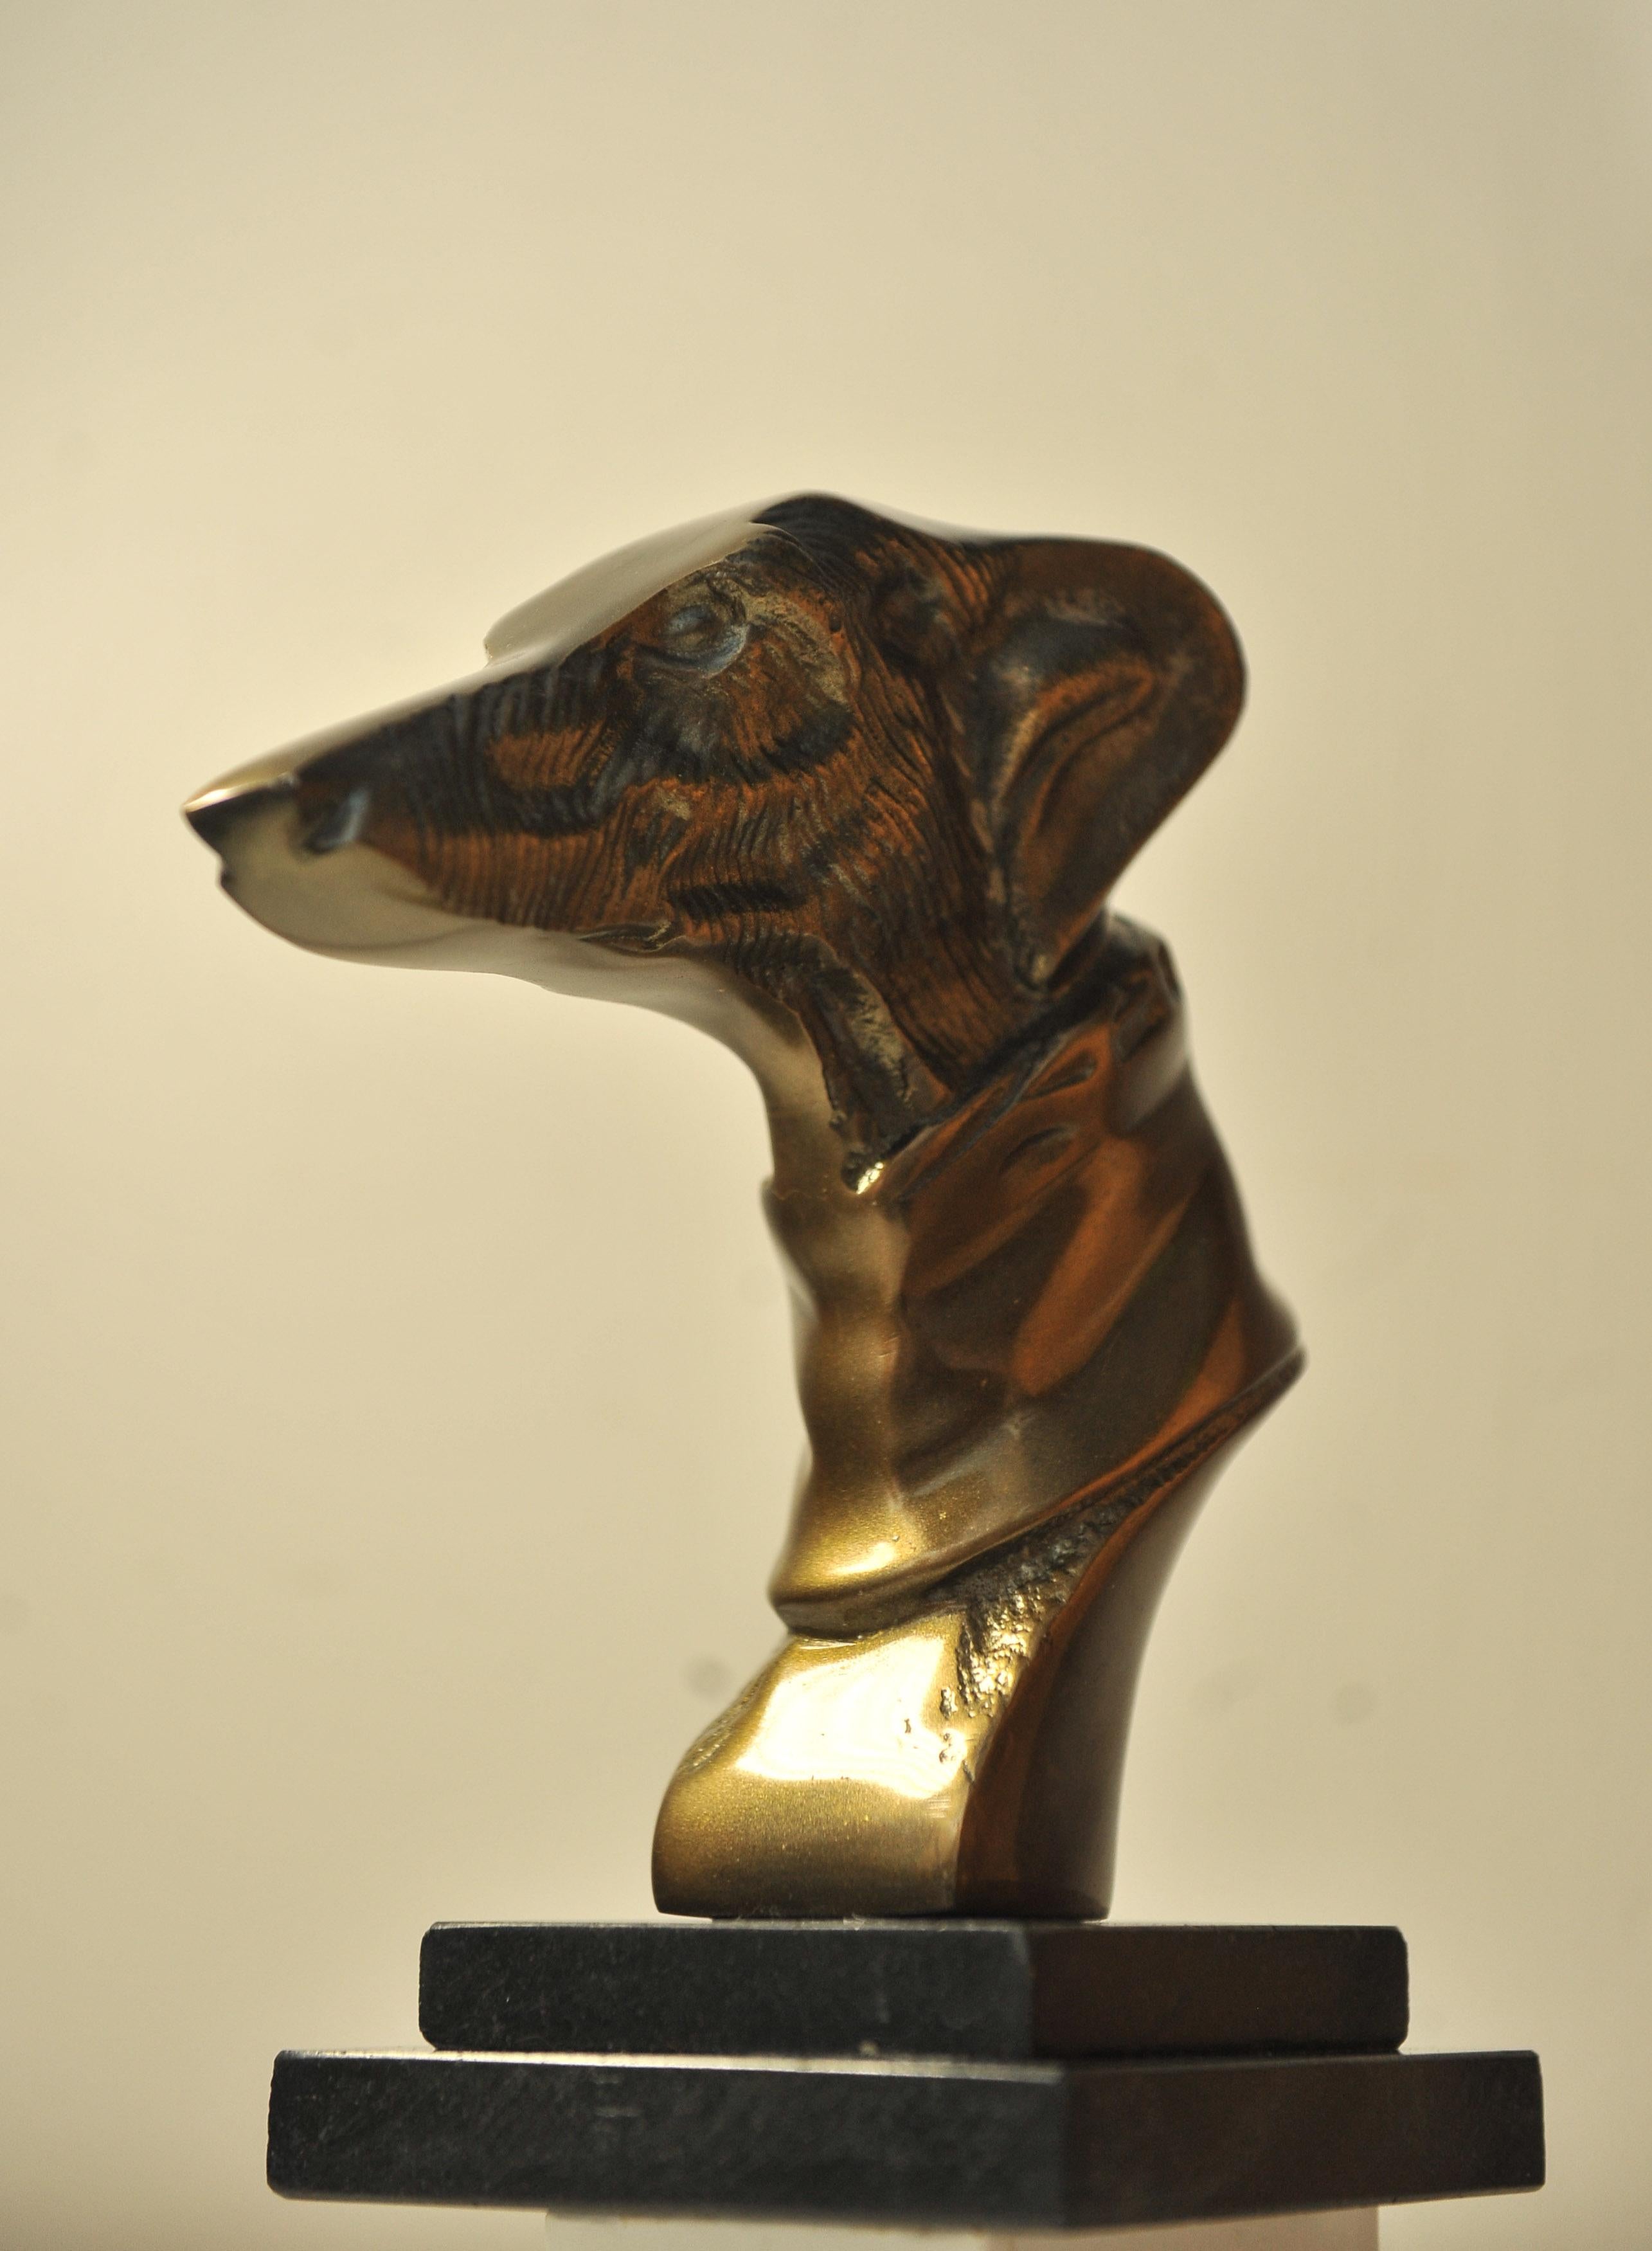 European Greyhound Bronze Figurehead On Plinth Ideal For Desk Paperweight Or Decoration. For Sale